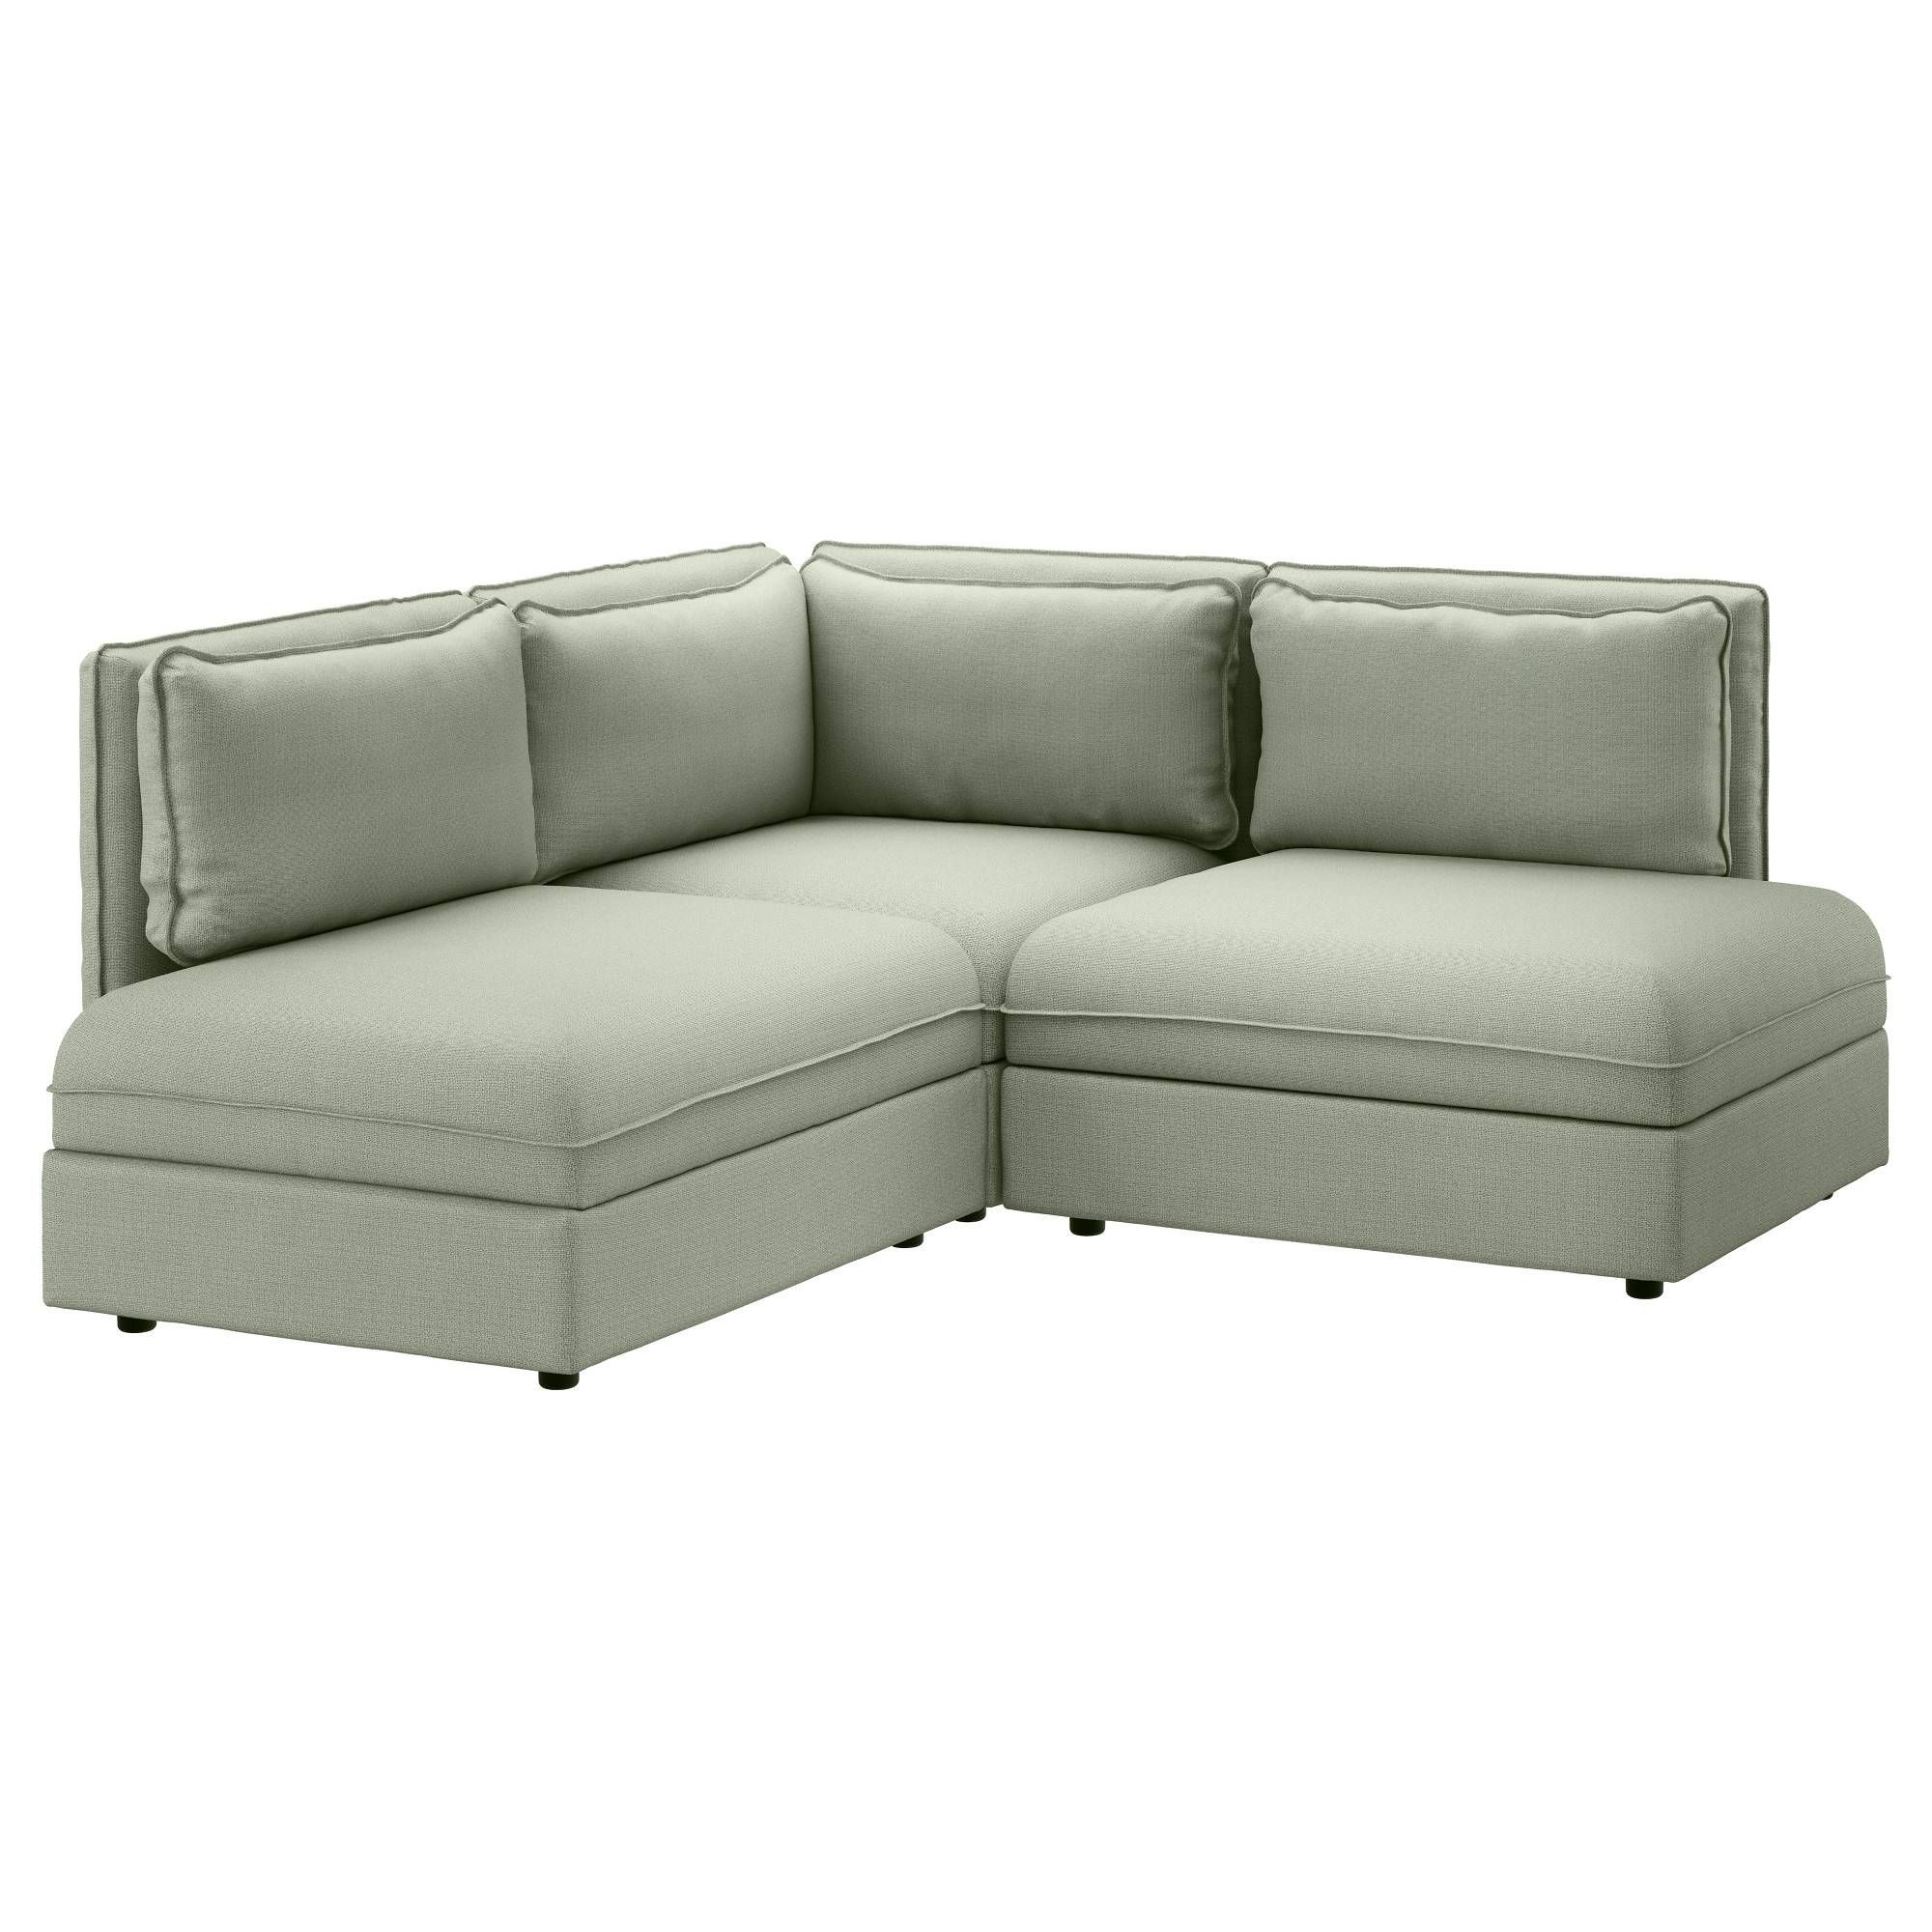 Sectional Sofas & Couches – Ikea For 2 Seat Sectional Sofas (View 2 of 30)